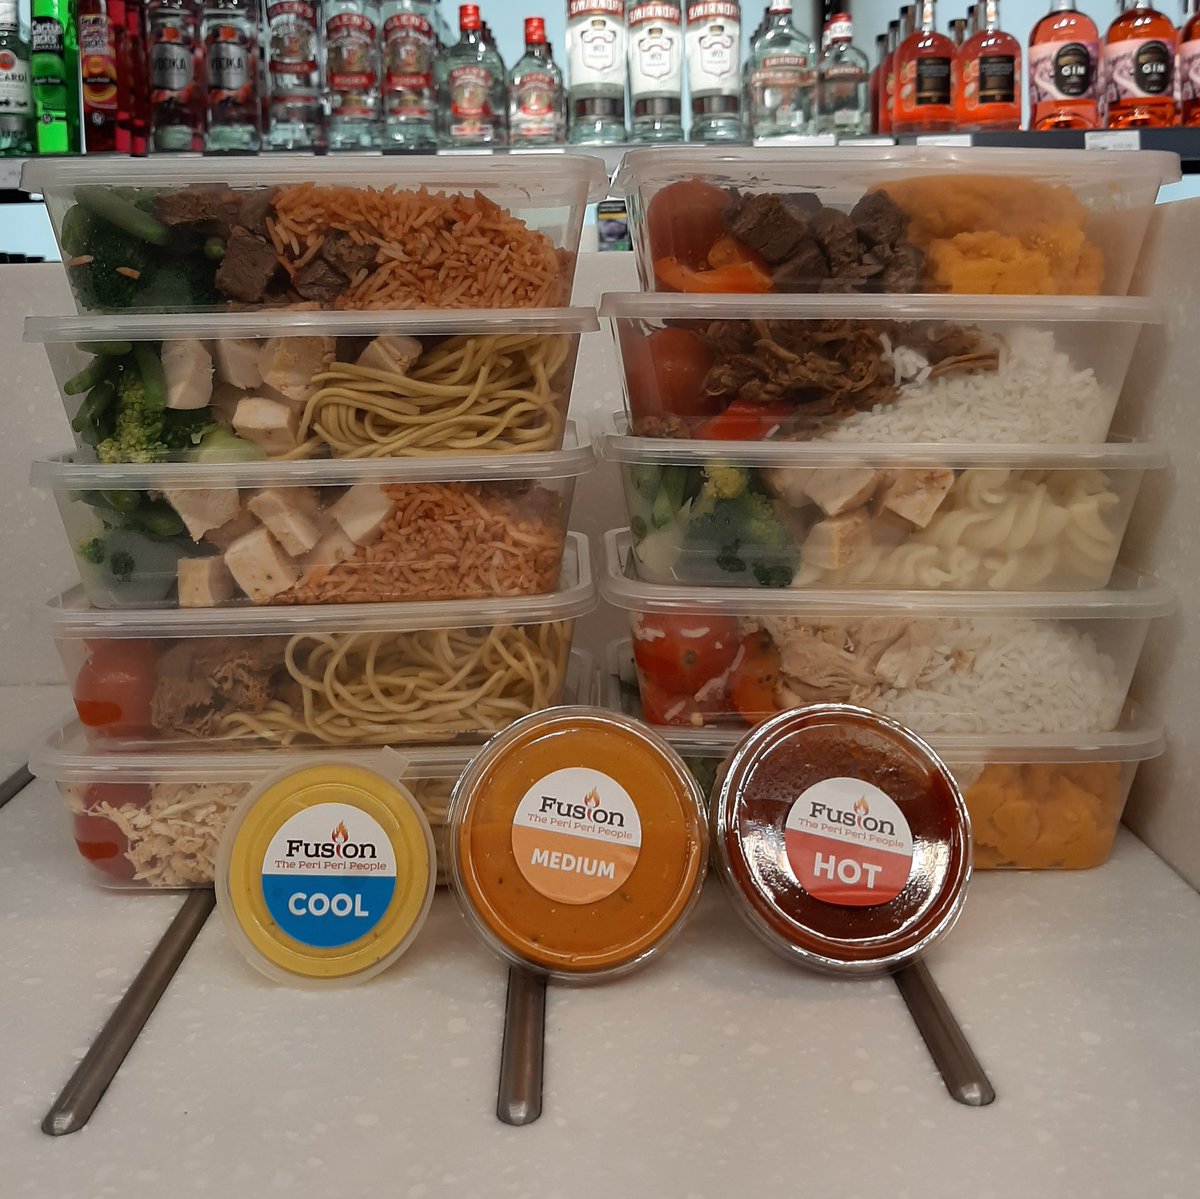 A fresh batch of Fusion Prep Meals have just arrived in.  All under 400 calories 💪.  Affordable✅ Tasty✅ and Convenient ✅
#heysham #morecambe #familystore #Independent #healthy #prepmeals #heyshamvillage #easylunch #healthylunch #wesaynisa